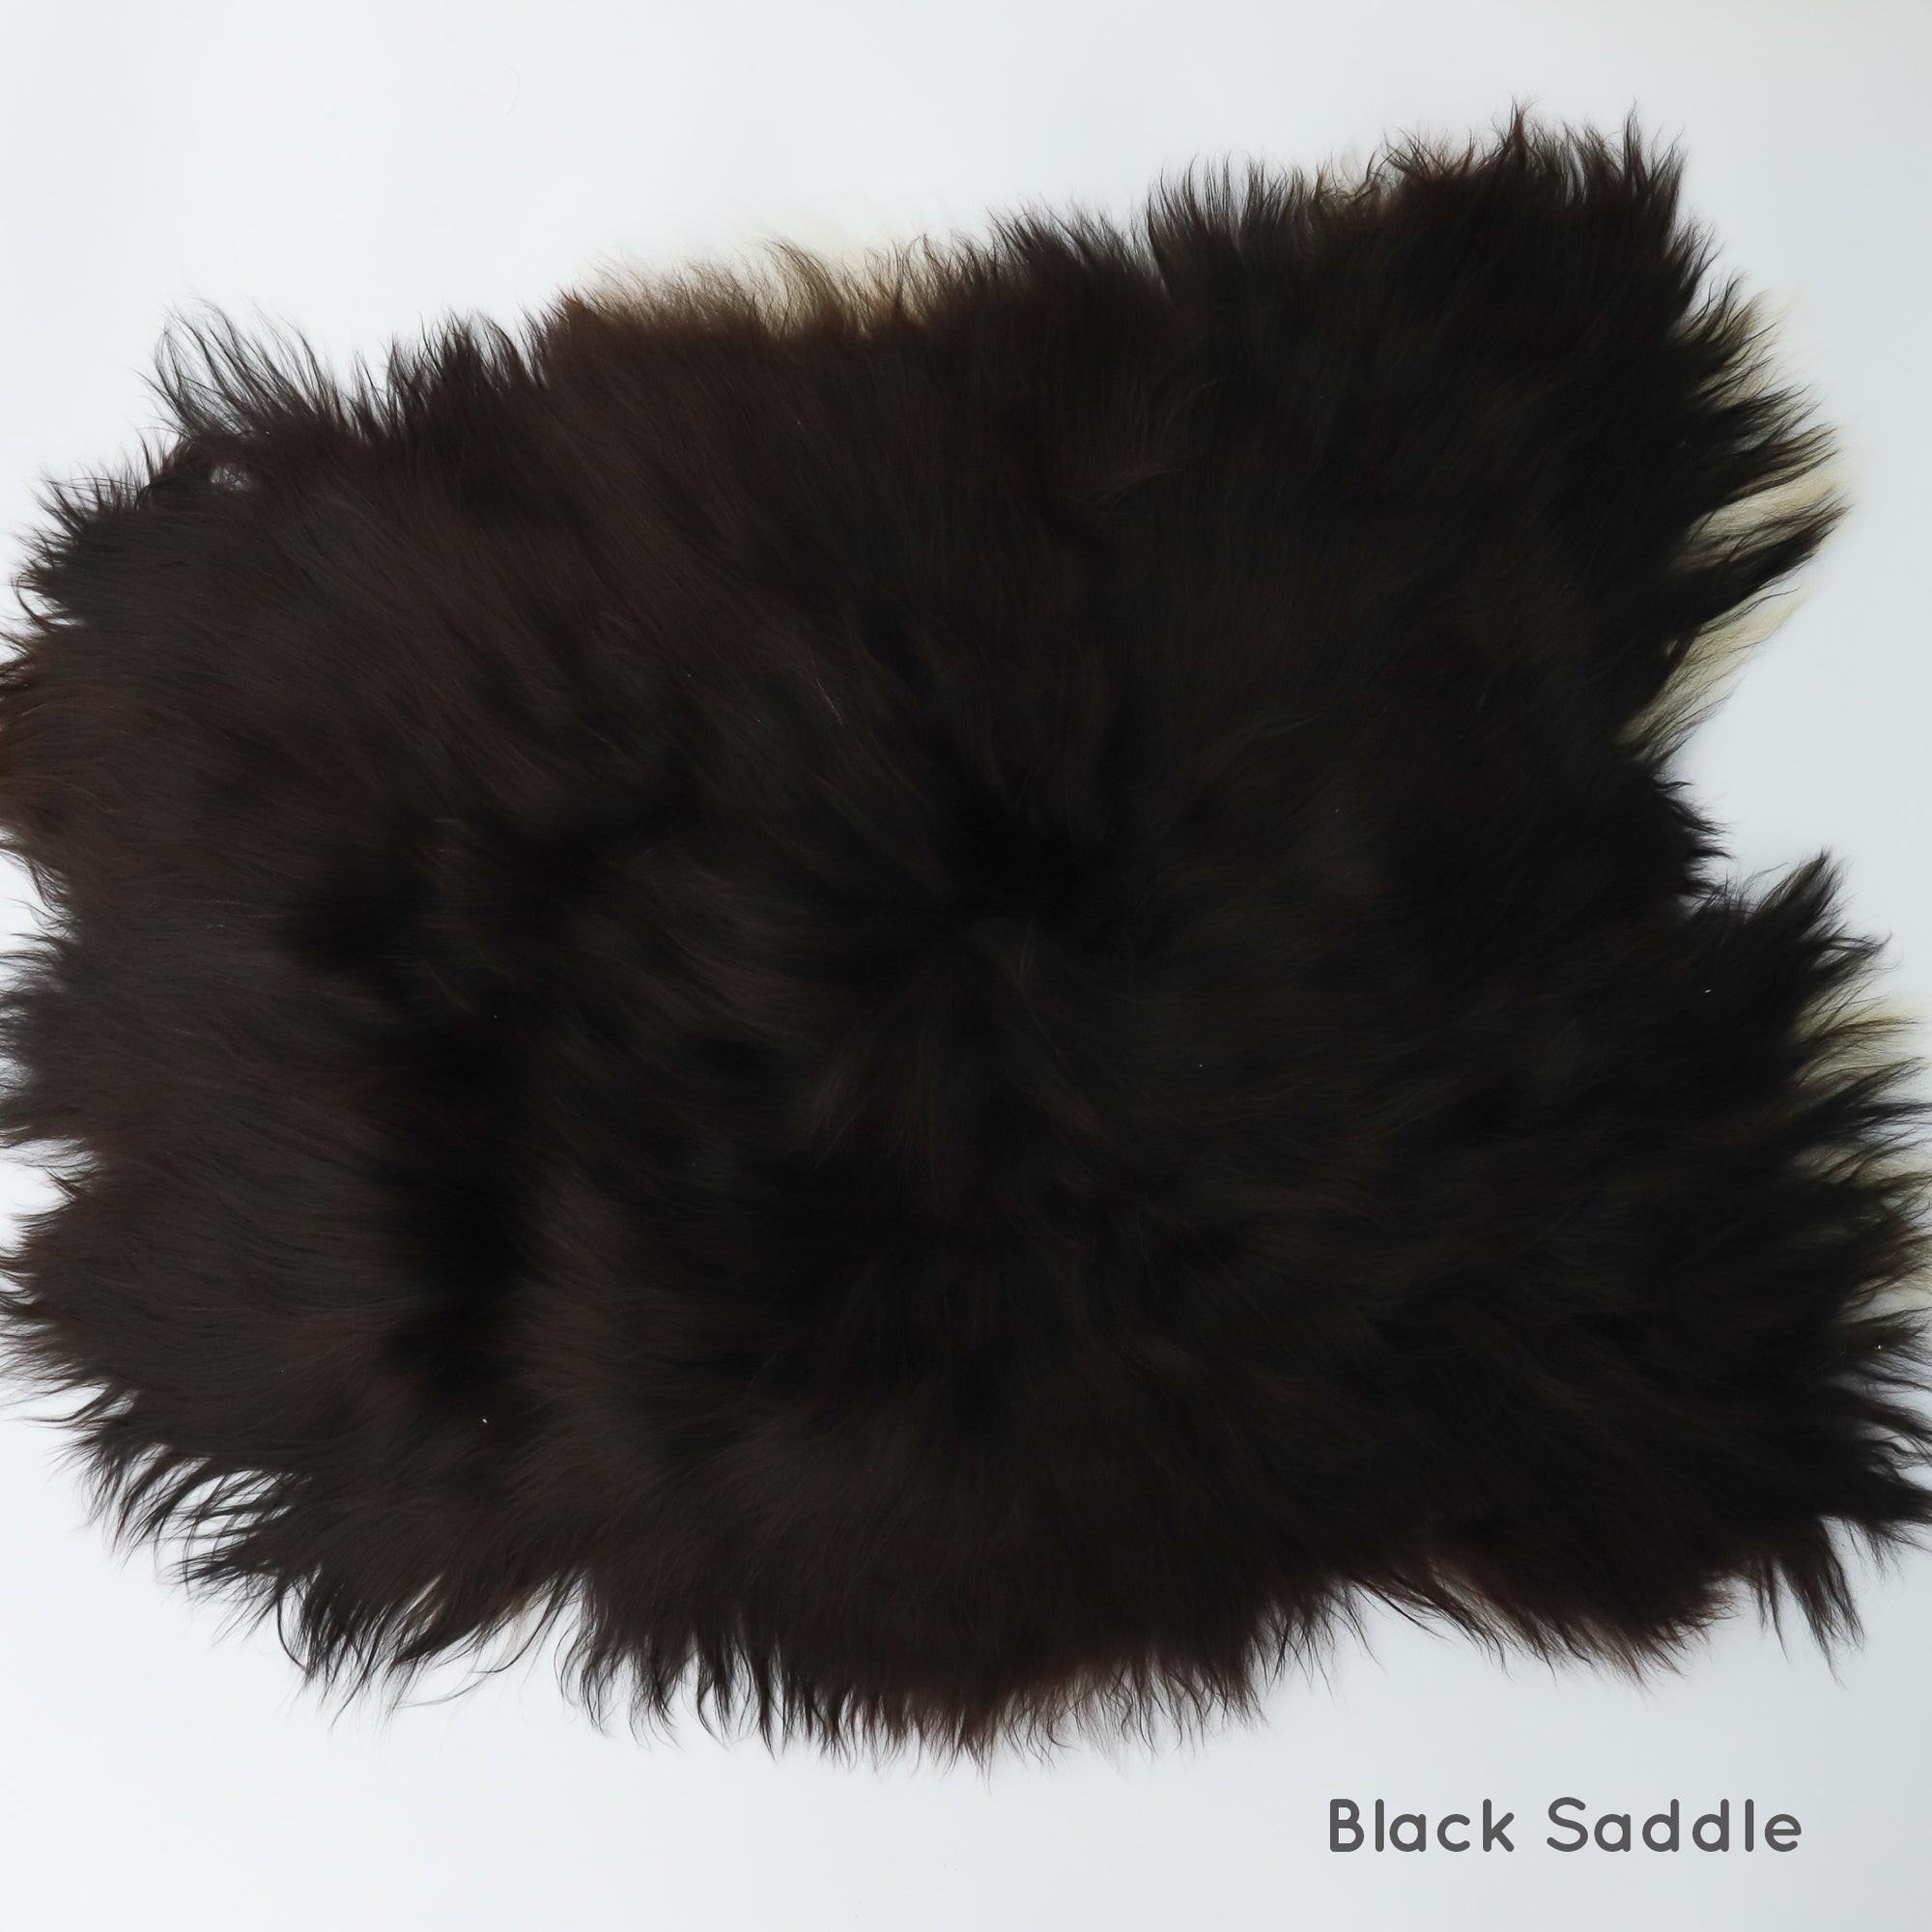 Premium Natural Icelandic Sheepskins Life of Riley Pet Products  The Life of Riley